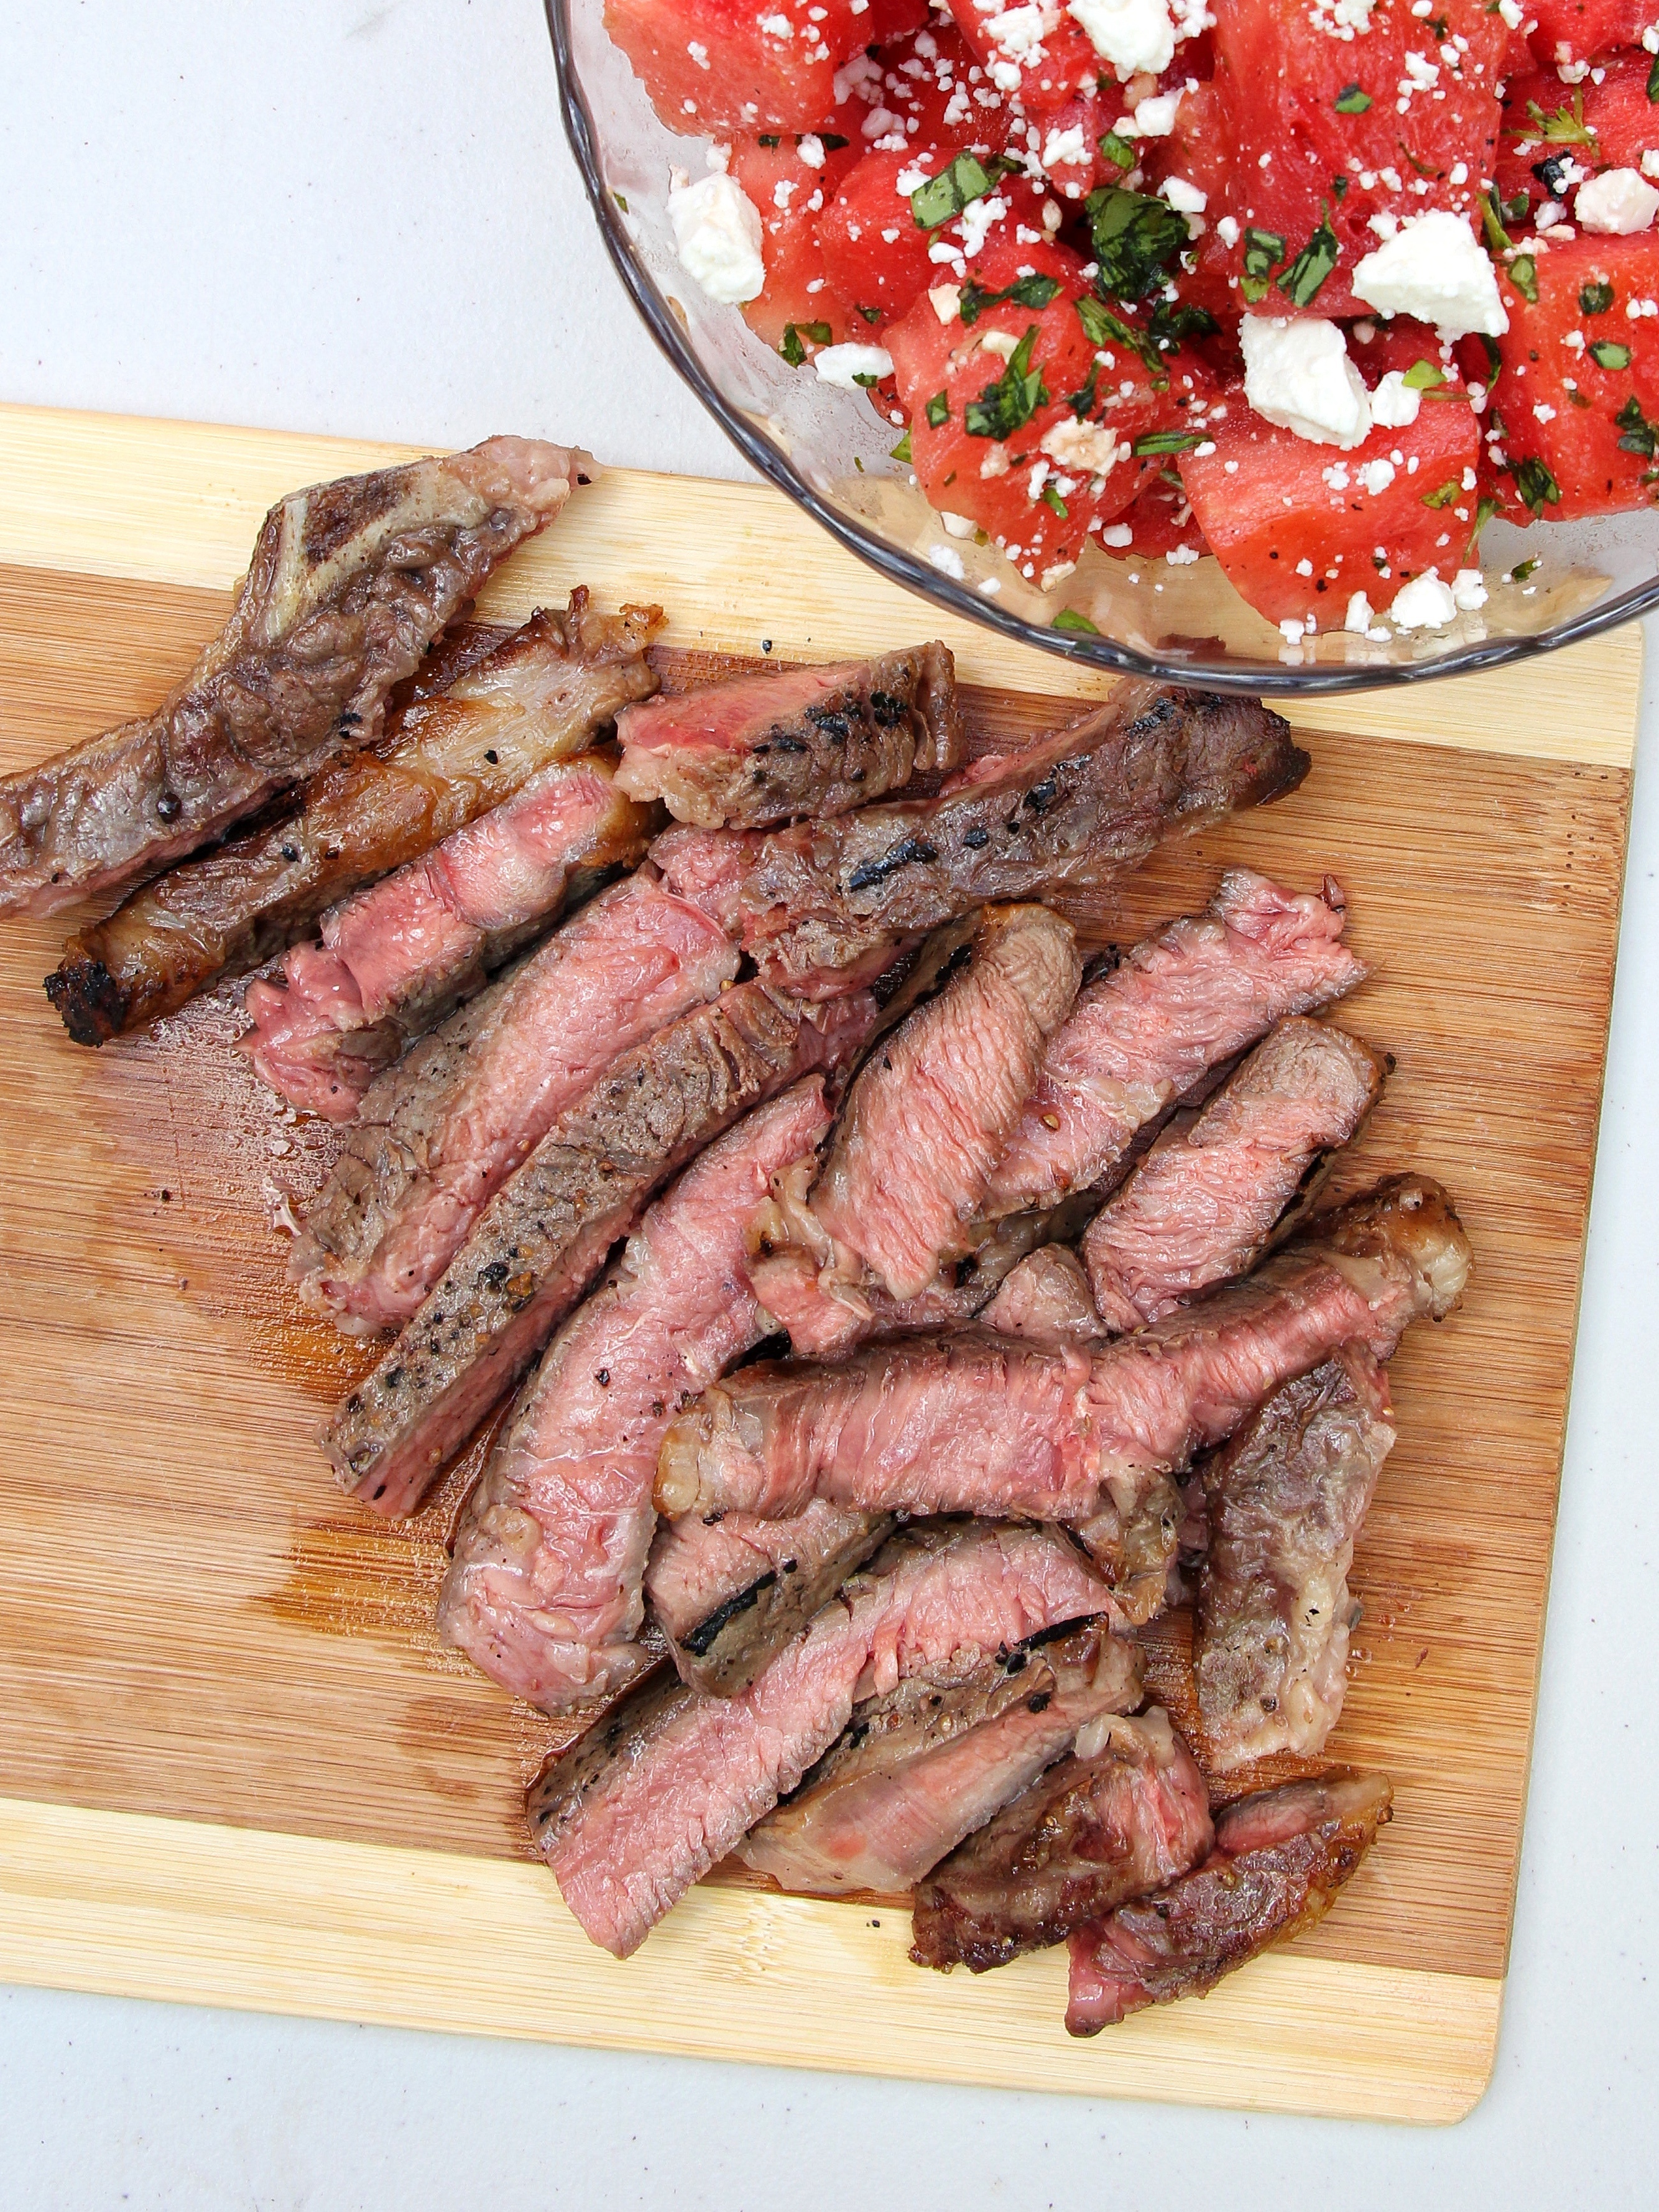 Grilled Steak and Watermelon Salad Recipe